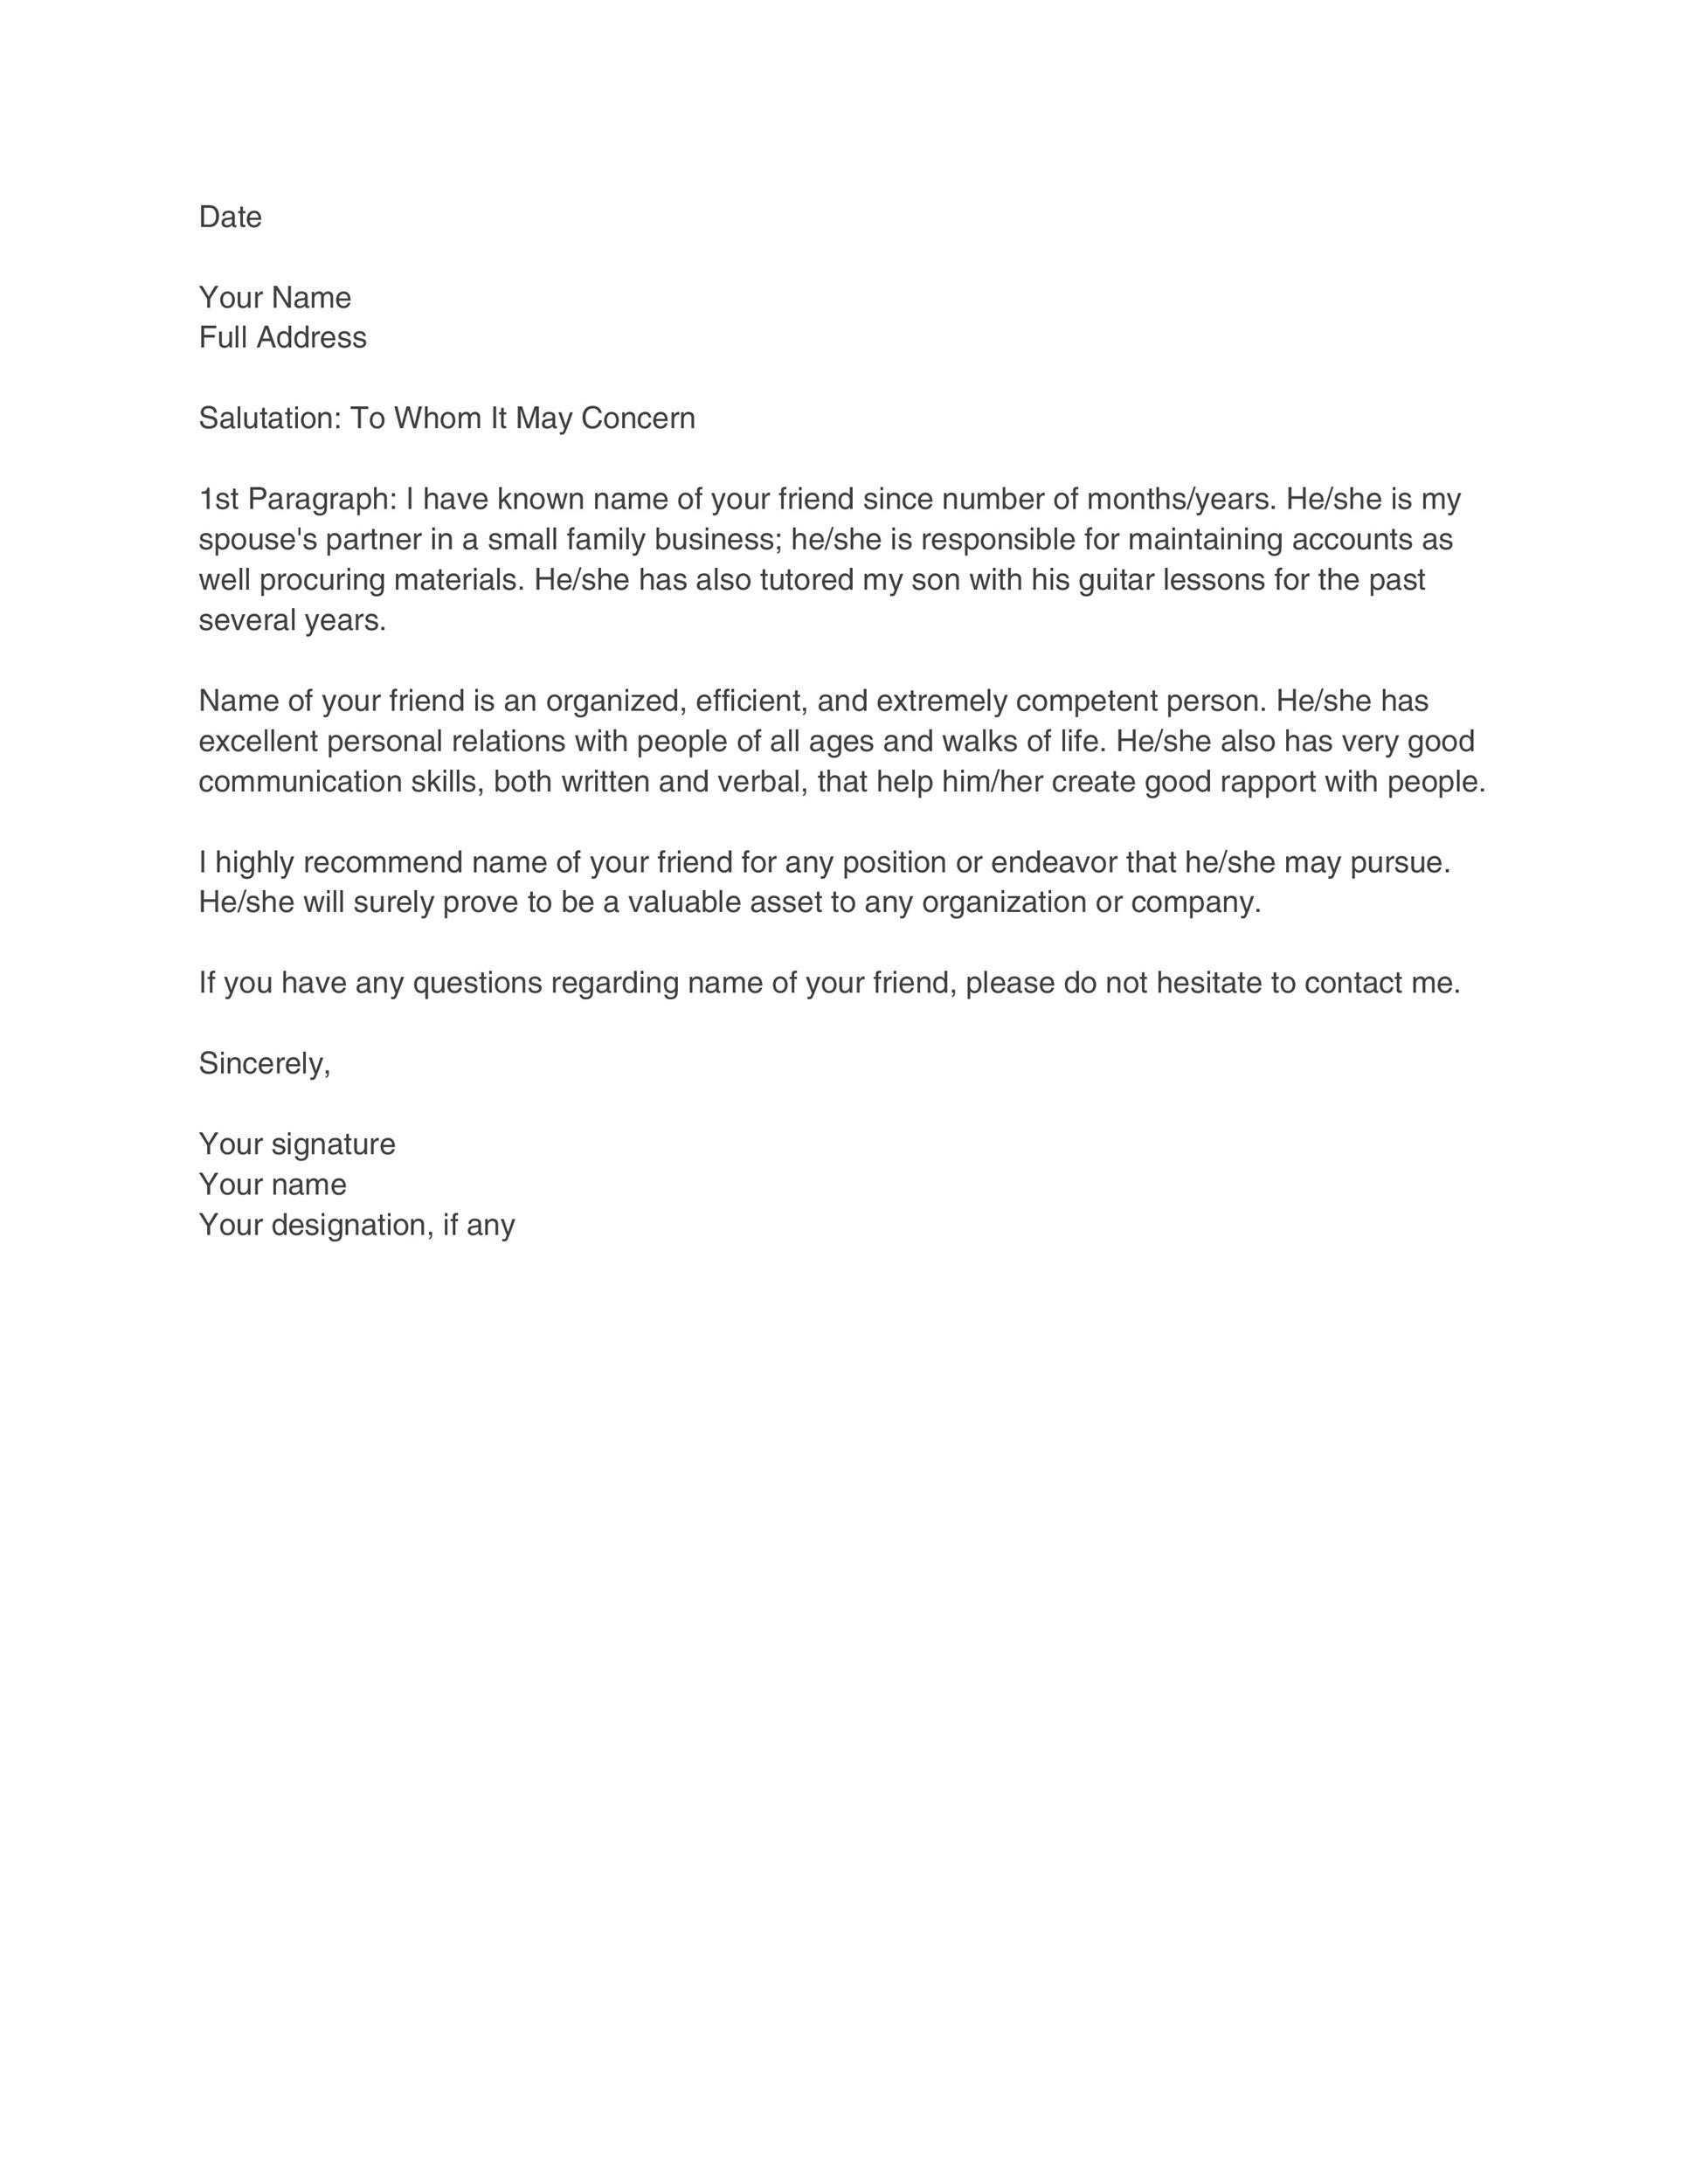 Recommendation Letter For A Friend from templatelab.com